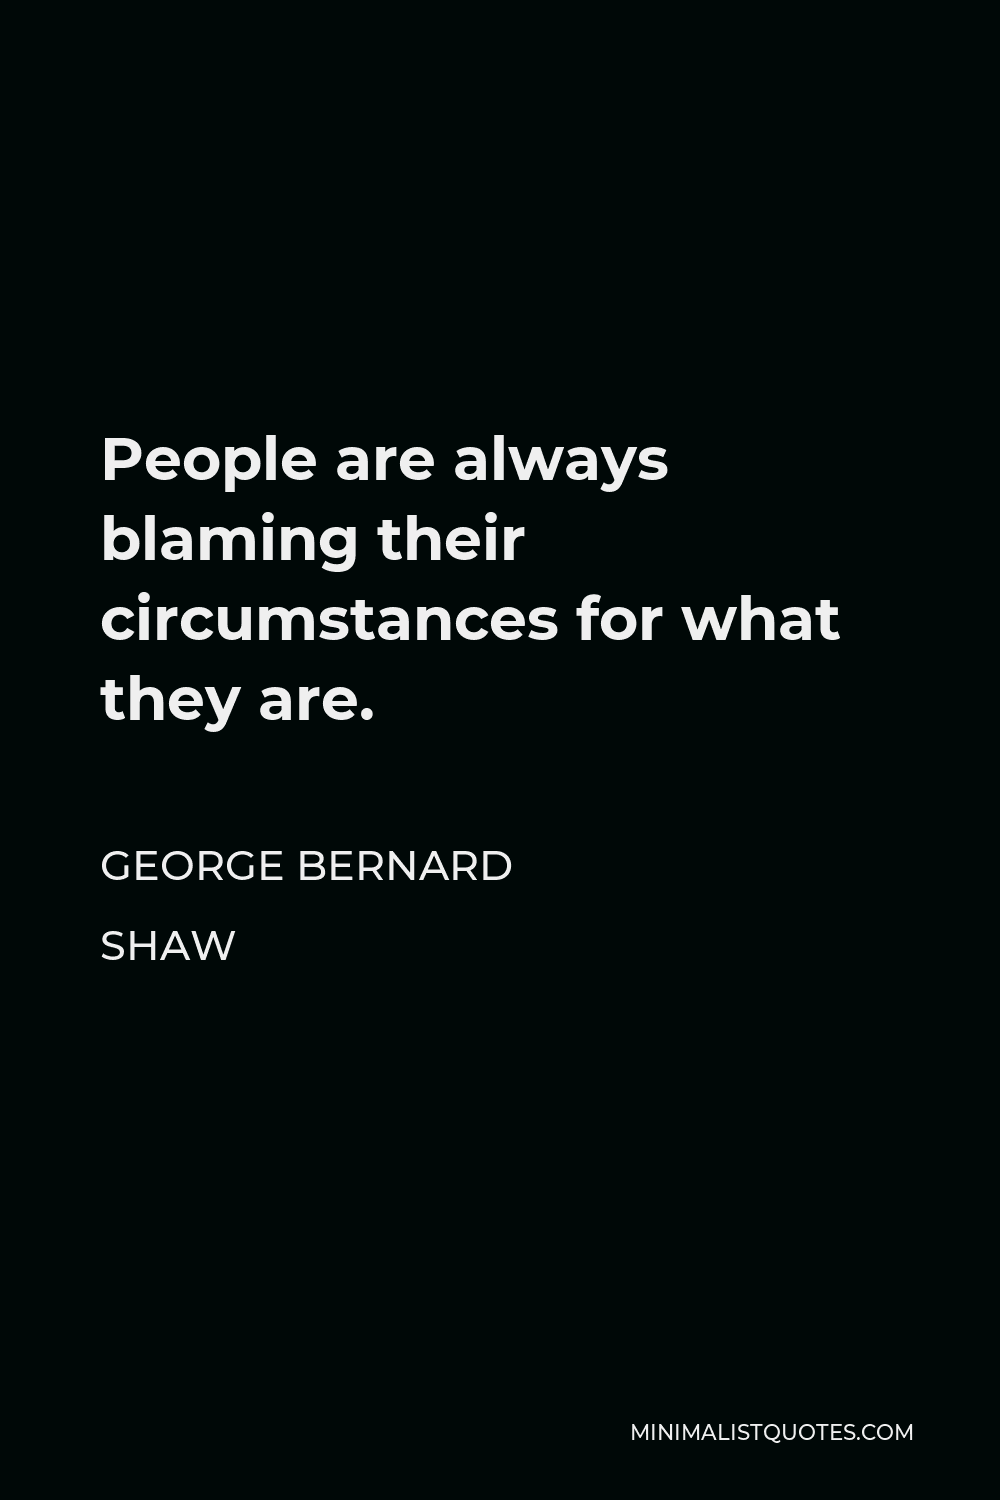 George Bernard Shaw Quote - People are always blaming their circumstances for what they are.